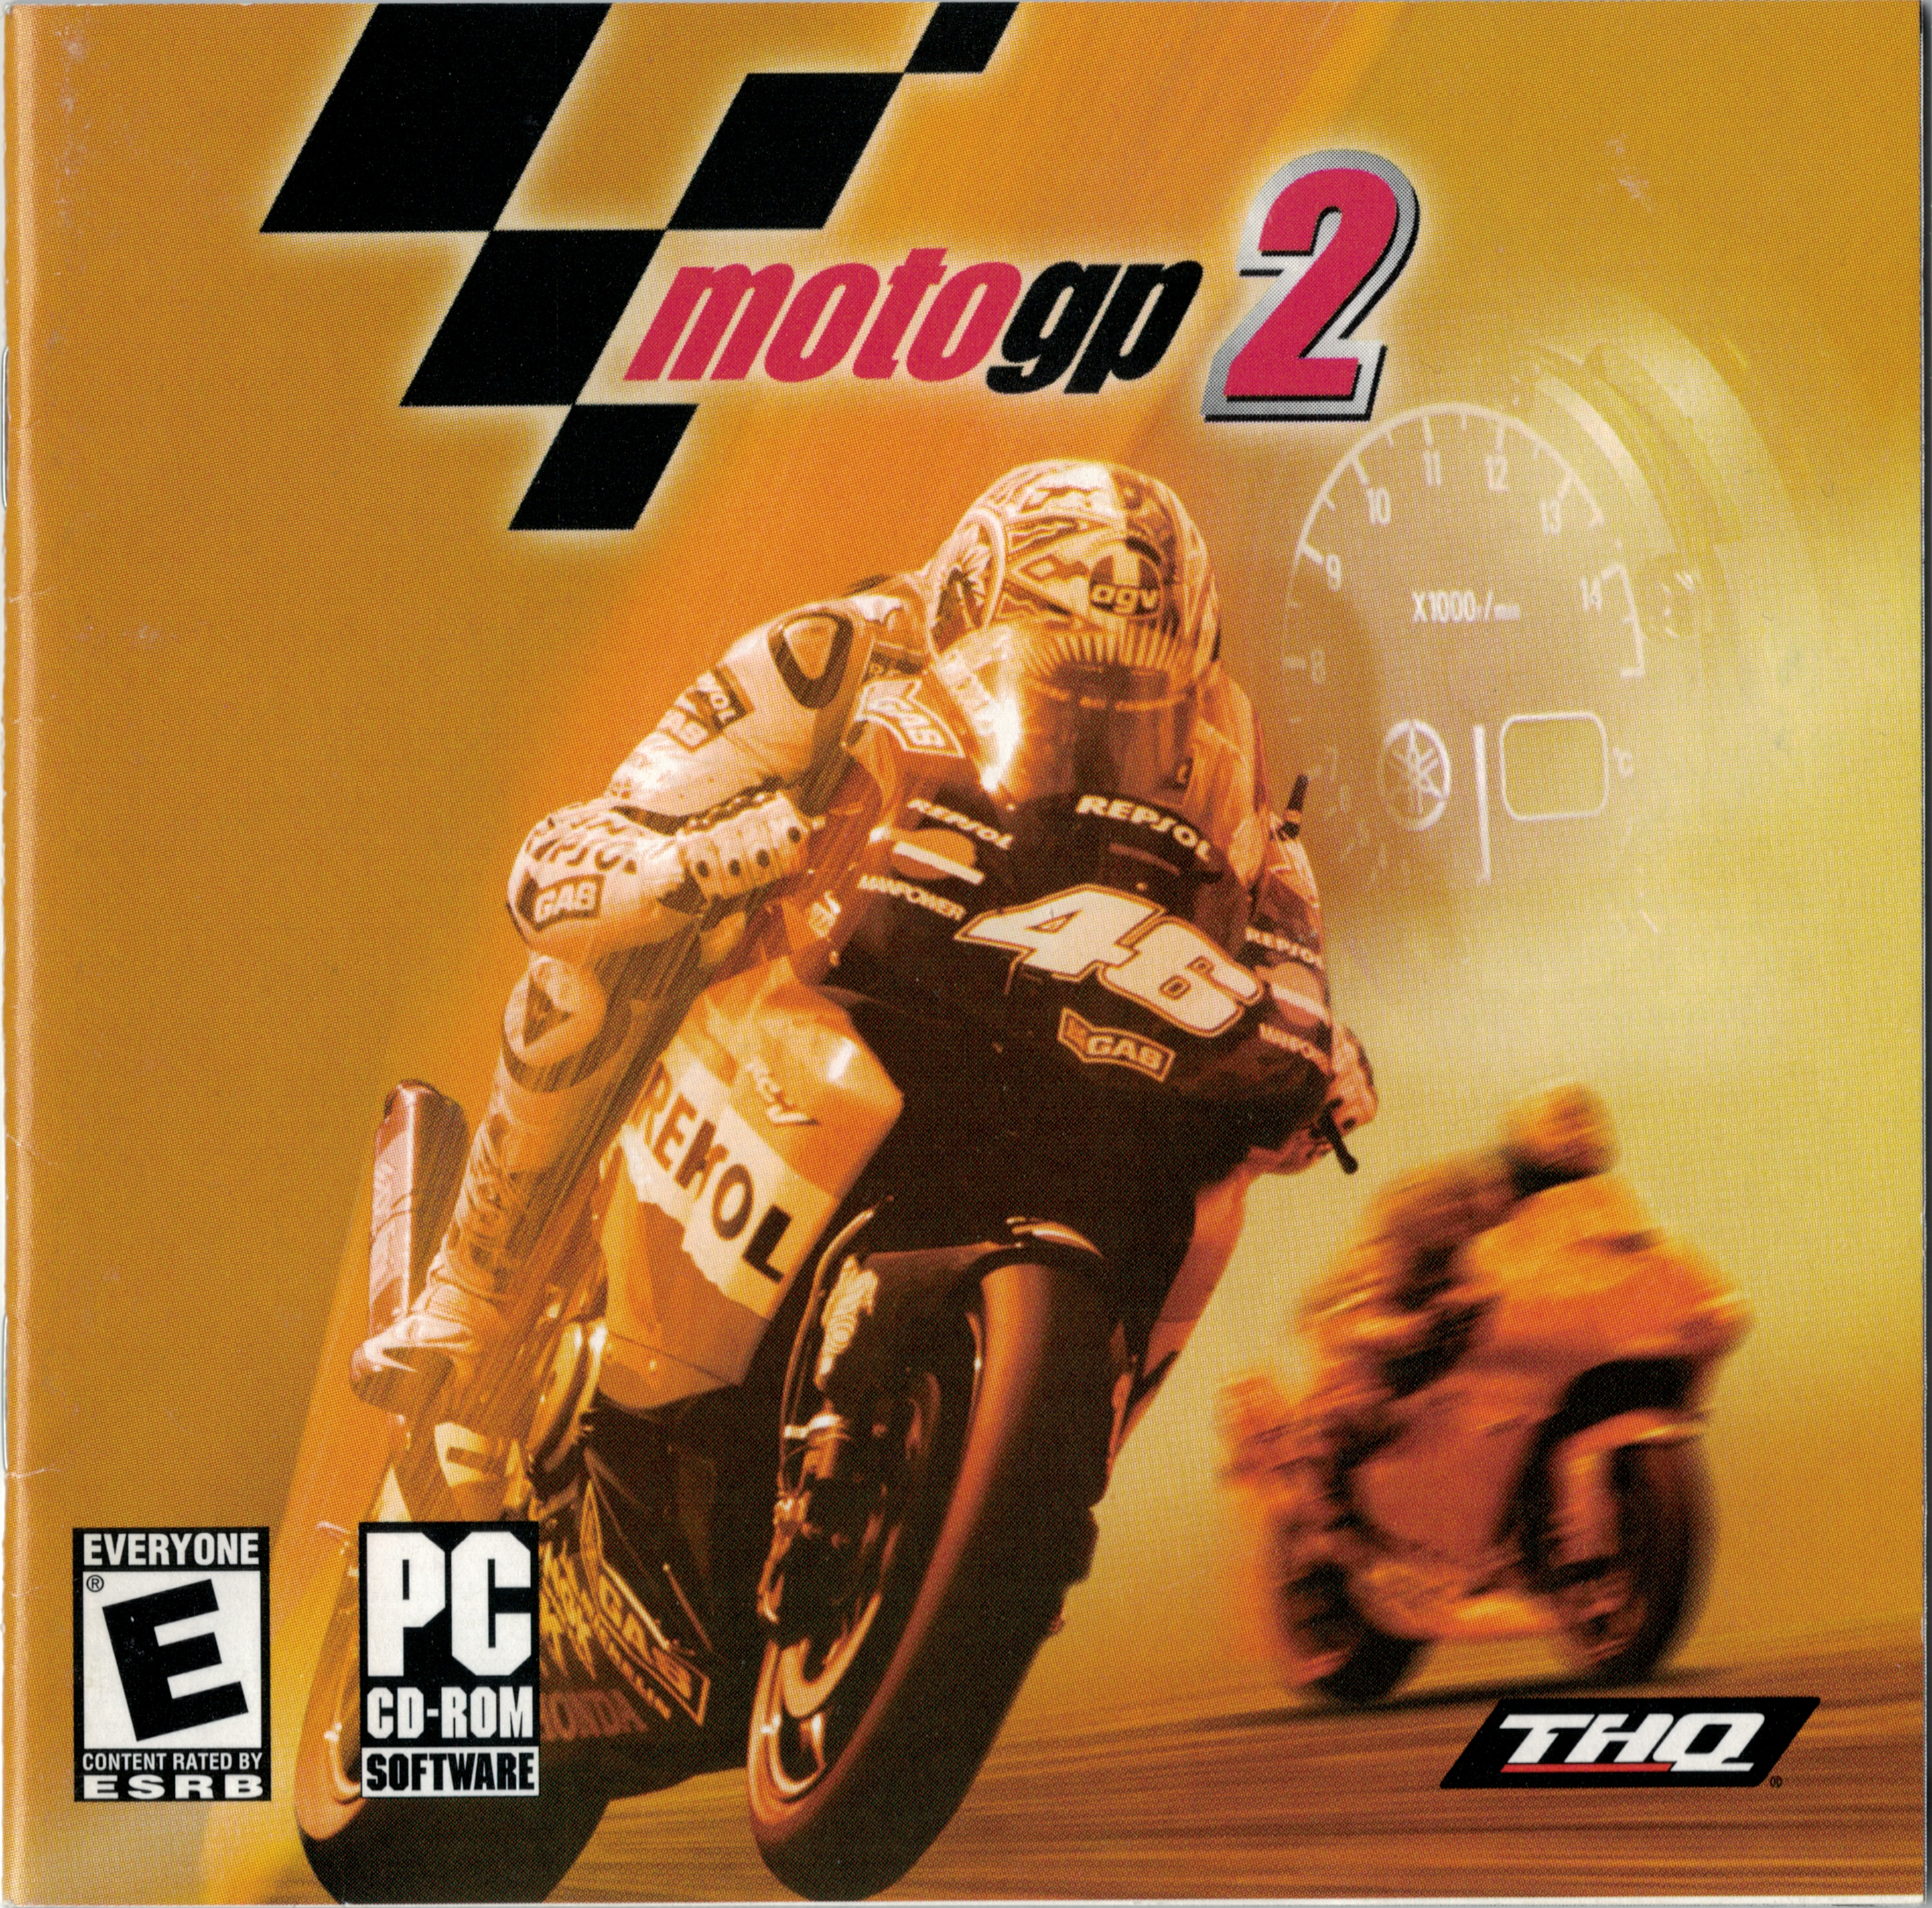 amotogp2%20cd%20cover20210719.png